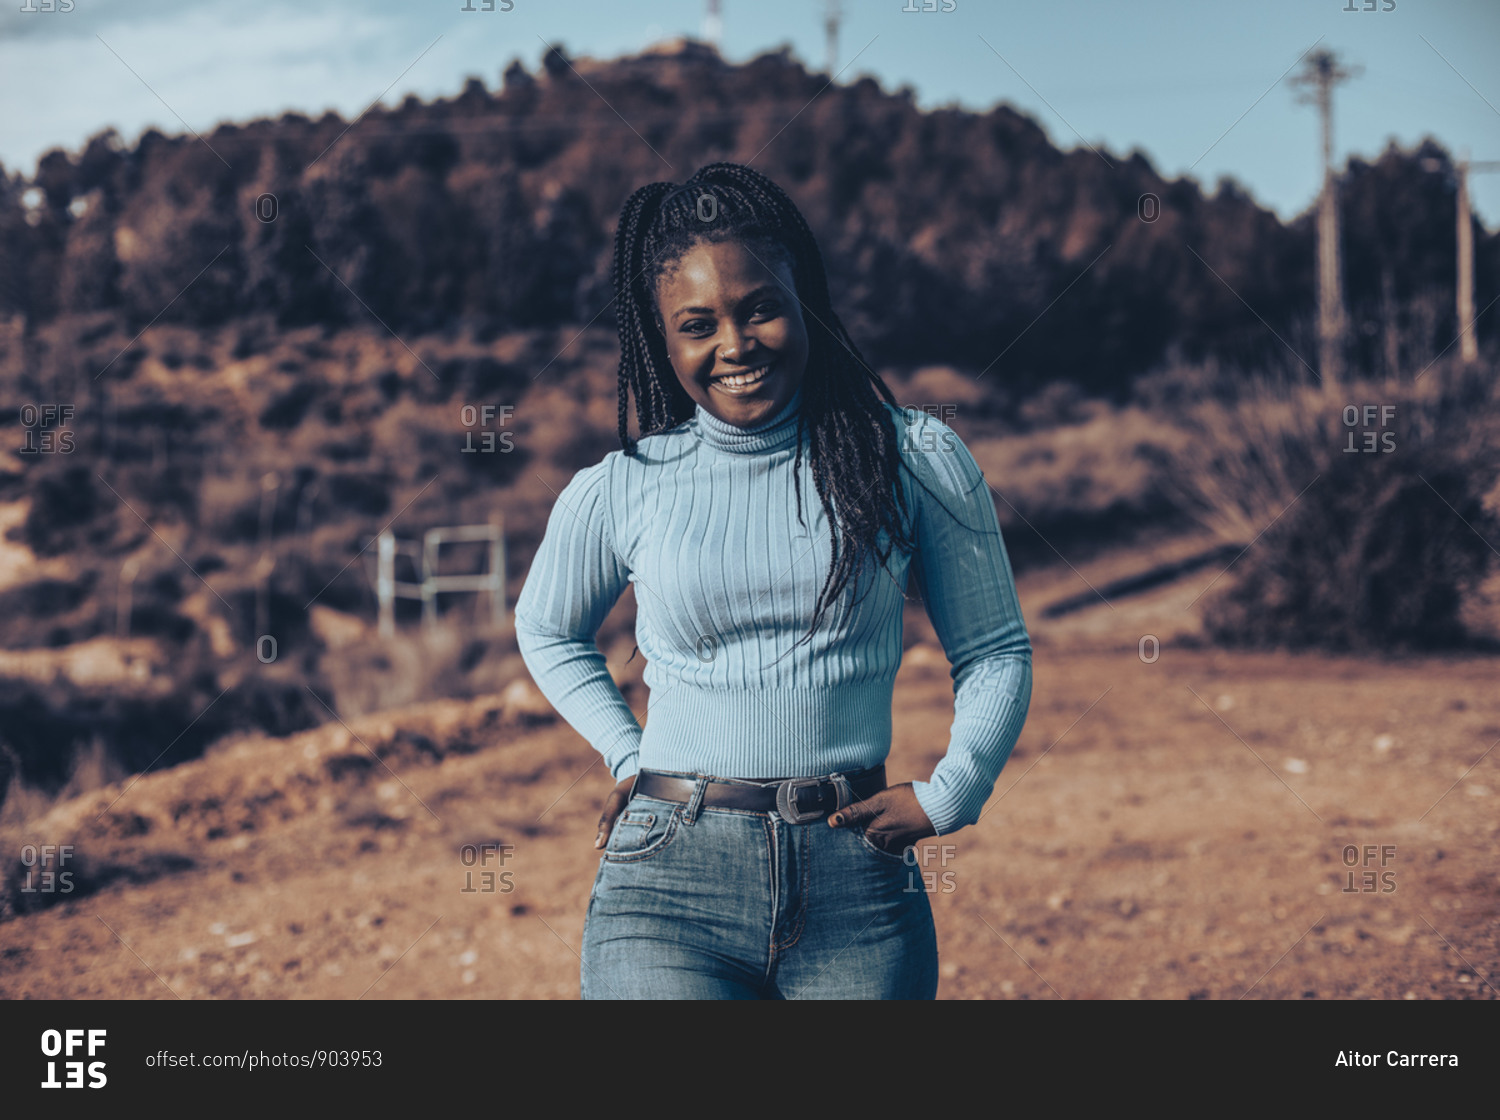 Smiling woman with braids wearing a blue turtleneck sweater\
standing in a rural setting stock photo - OFFSET